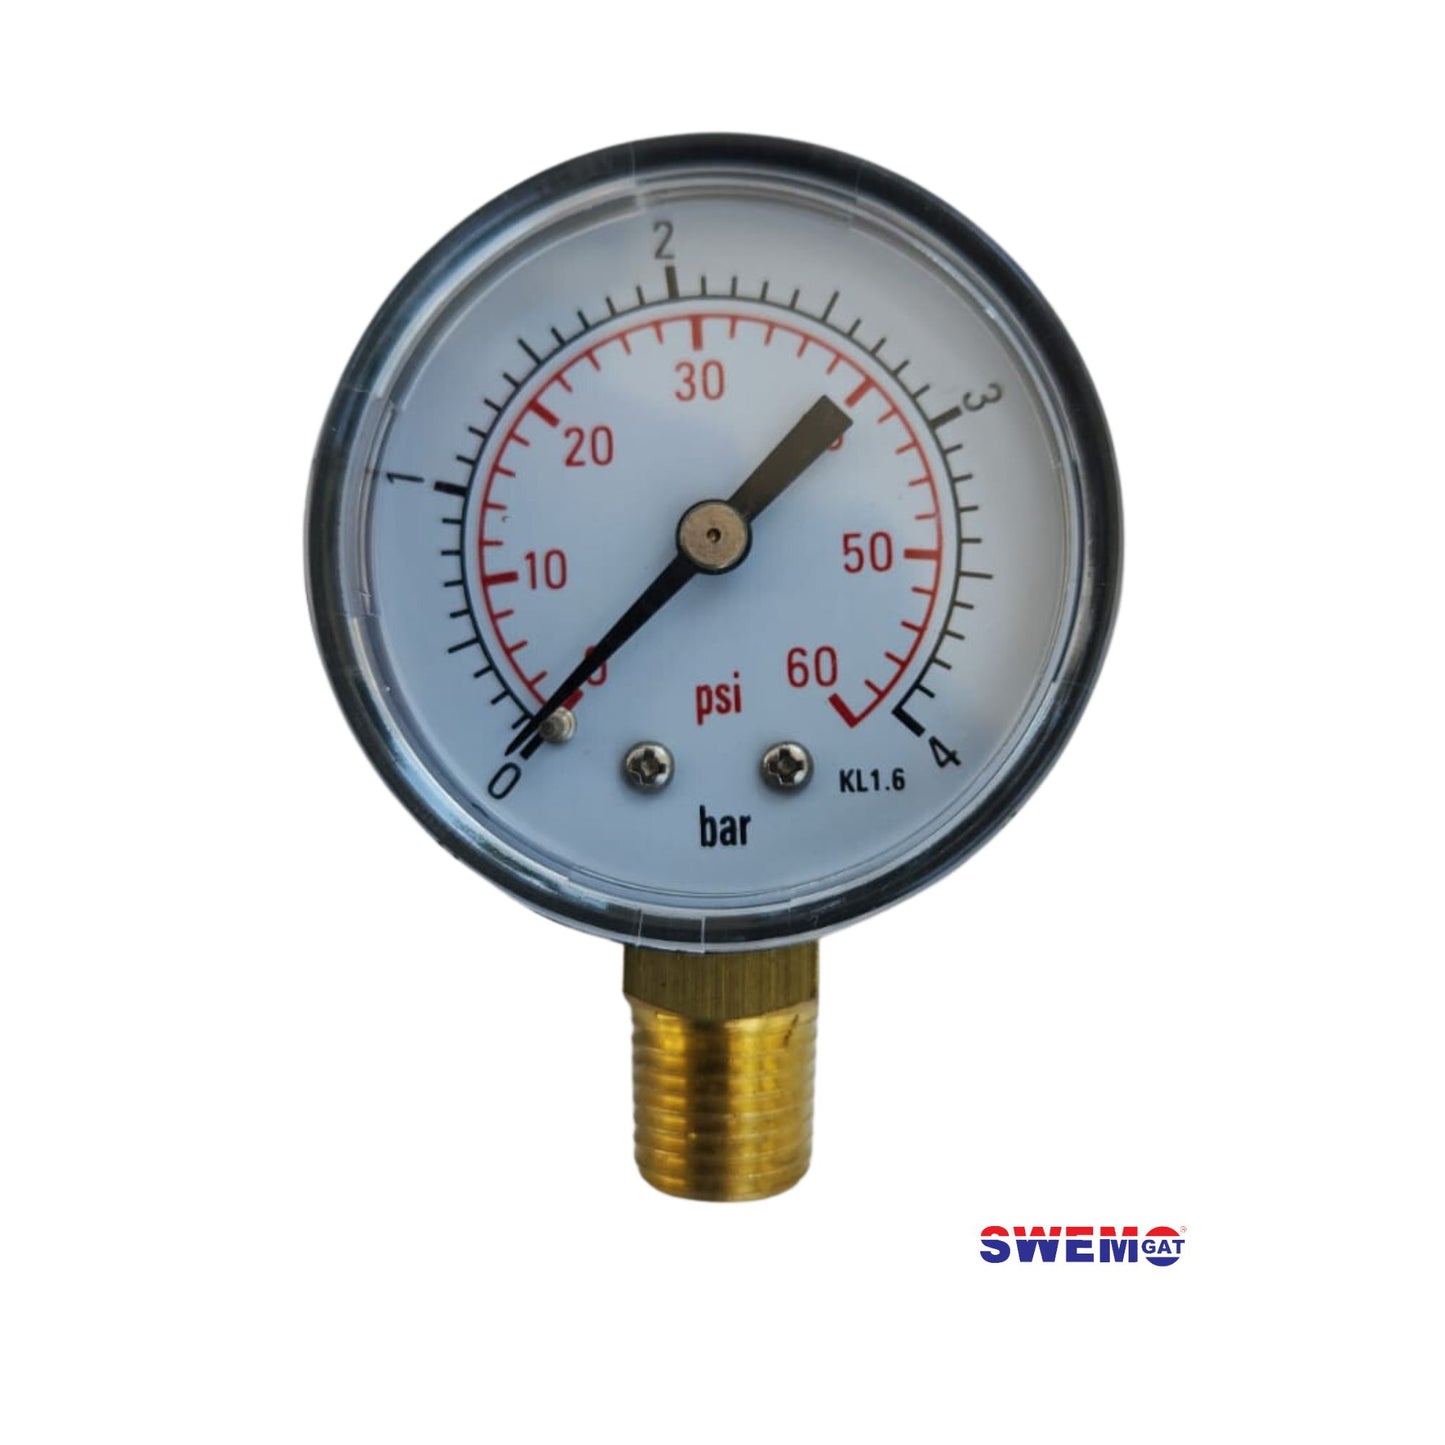 Pressure gauge for sand filters (Water saving device)